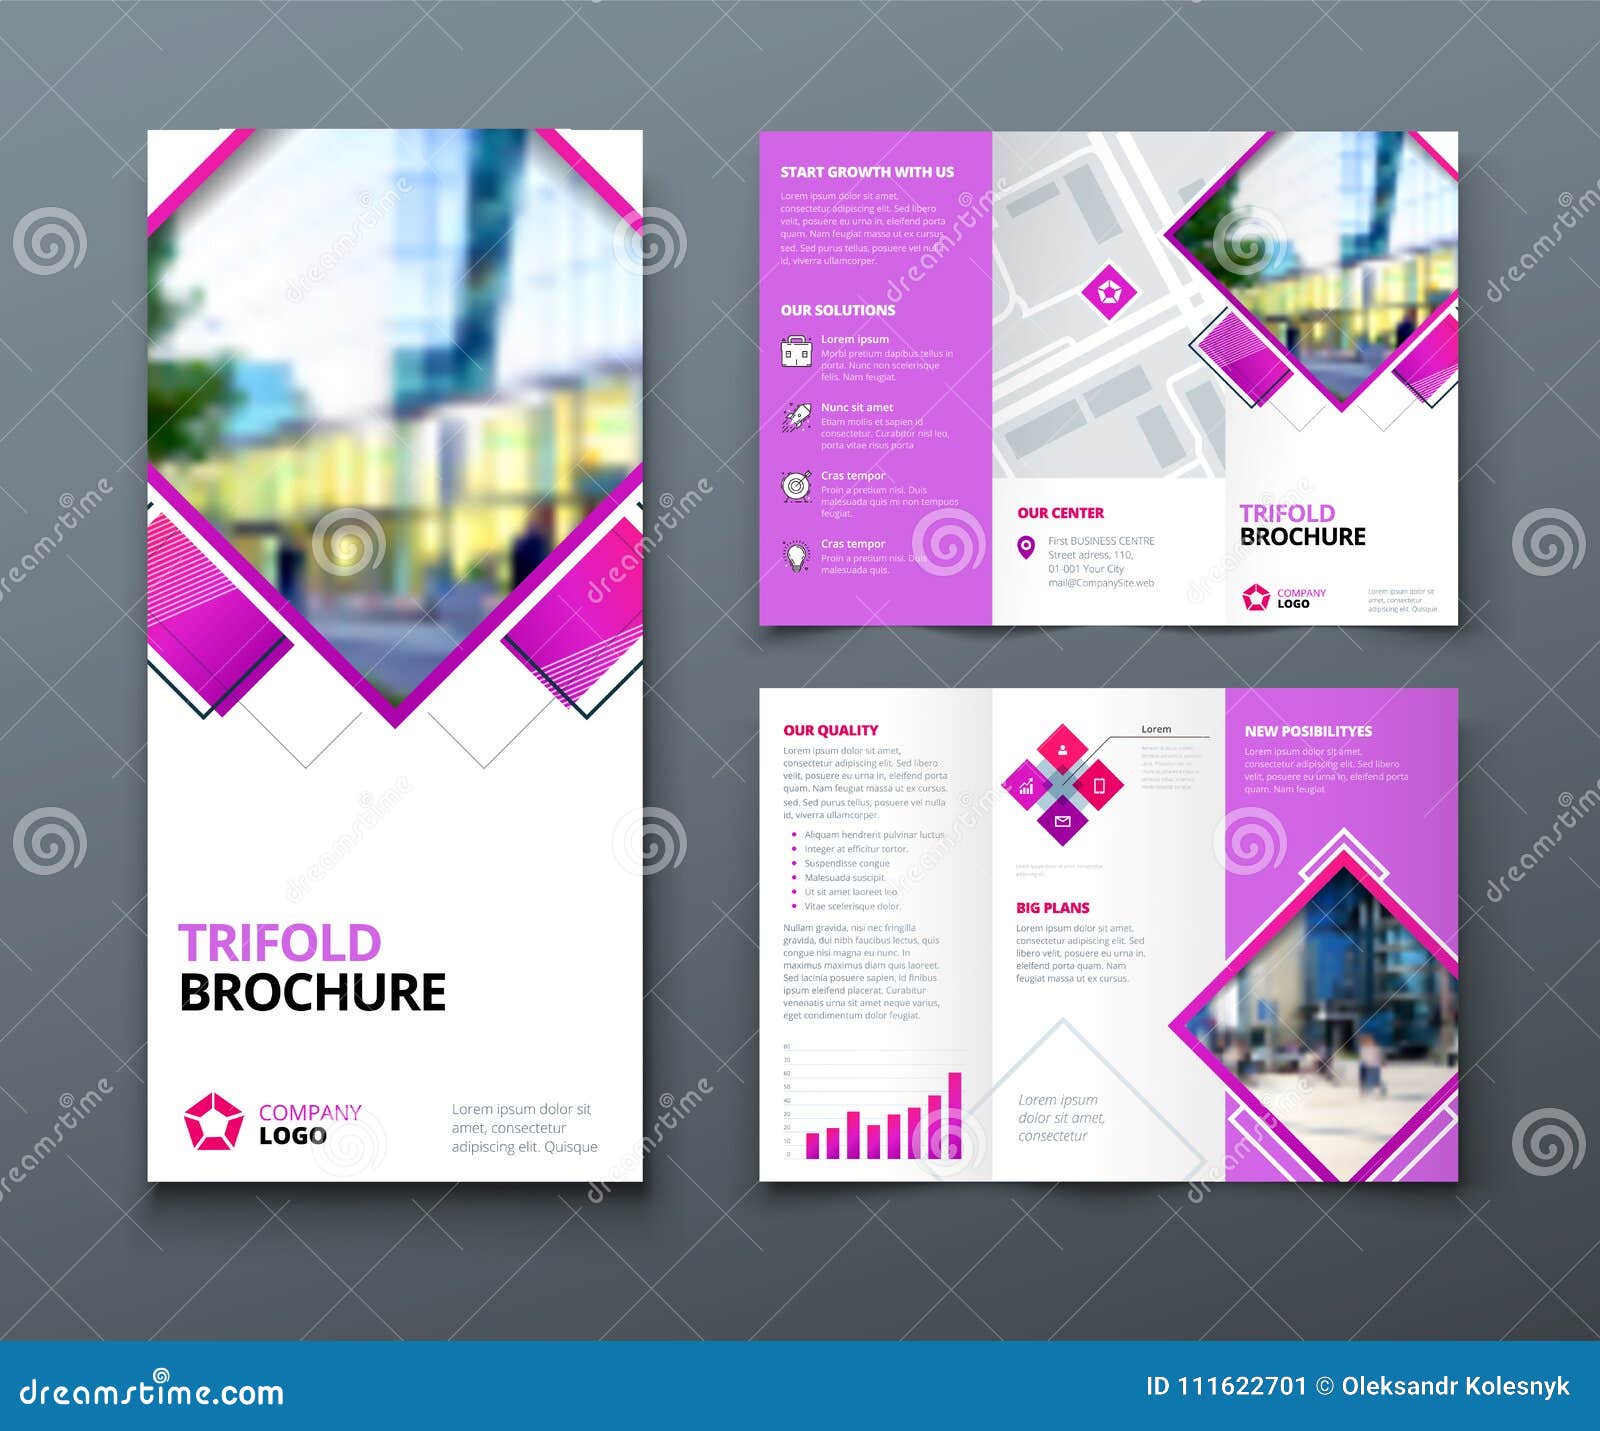 tri fold brochure . corporate business template for tri fold flyer with rhombus square s.